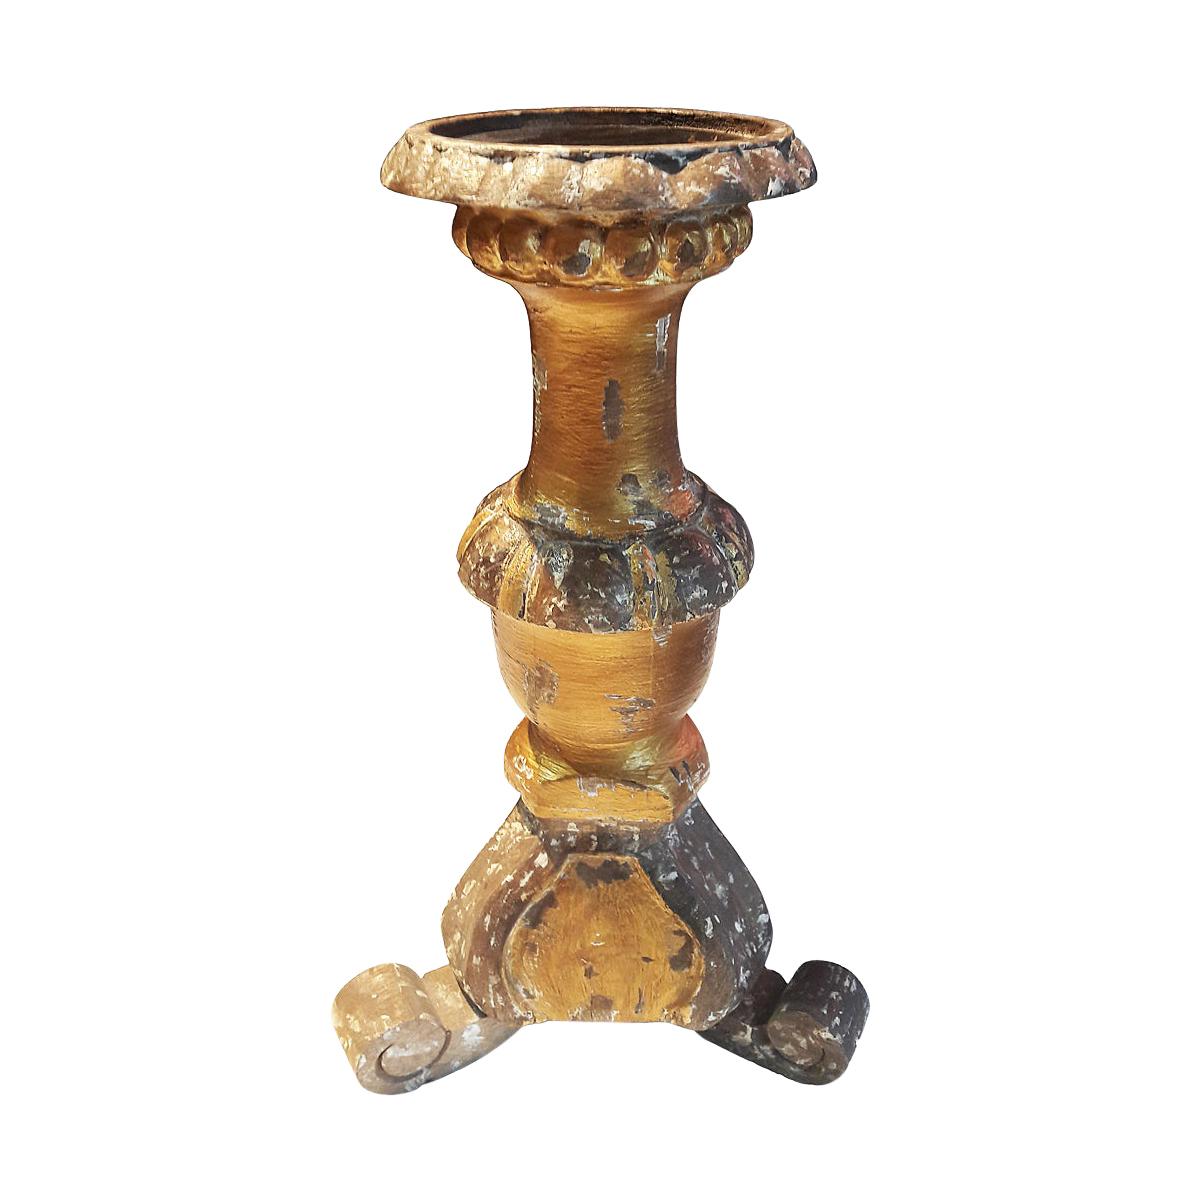 Hand Carved Wood Candlestick from India, in Gilt Rustic Finish